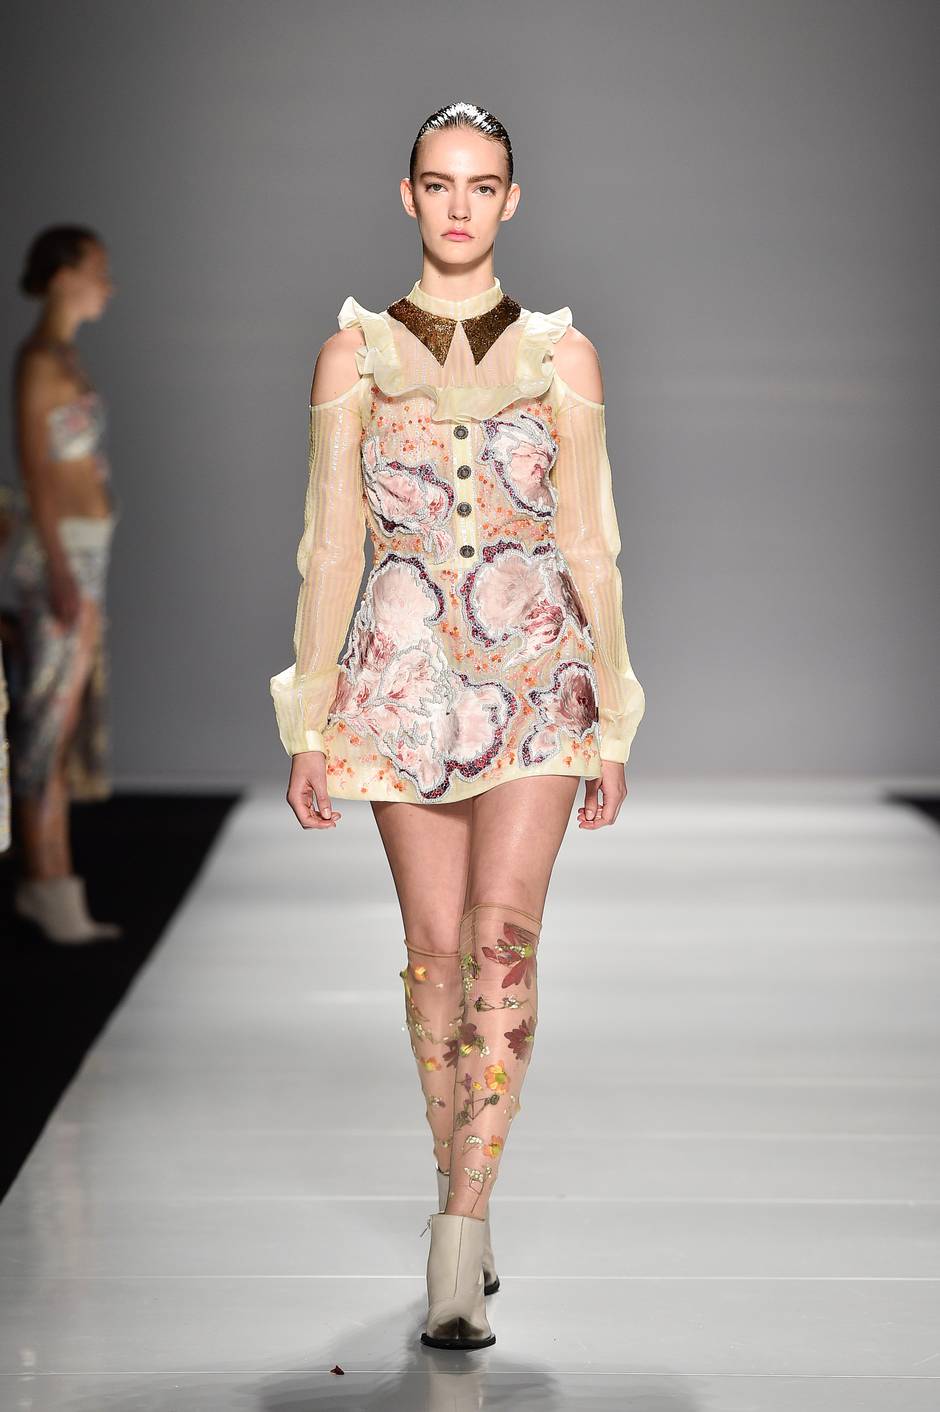 Best in show: The top five collections from Toronto fashion week - The ...